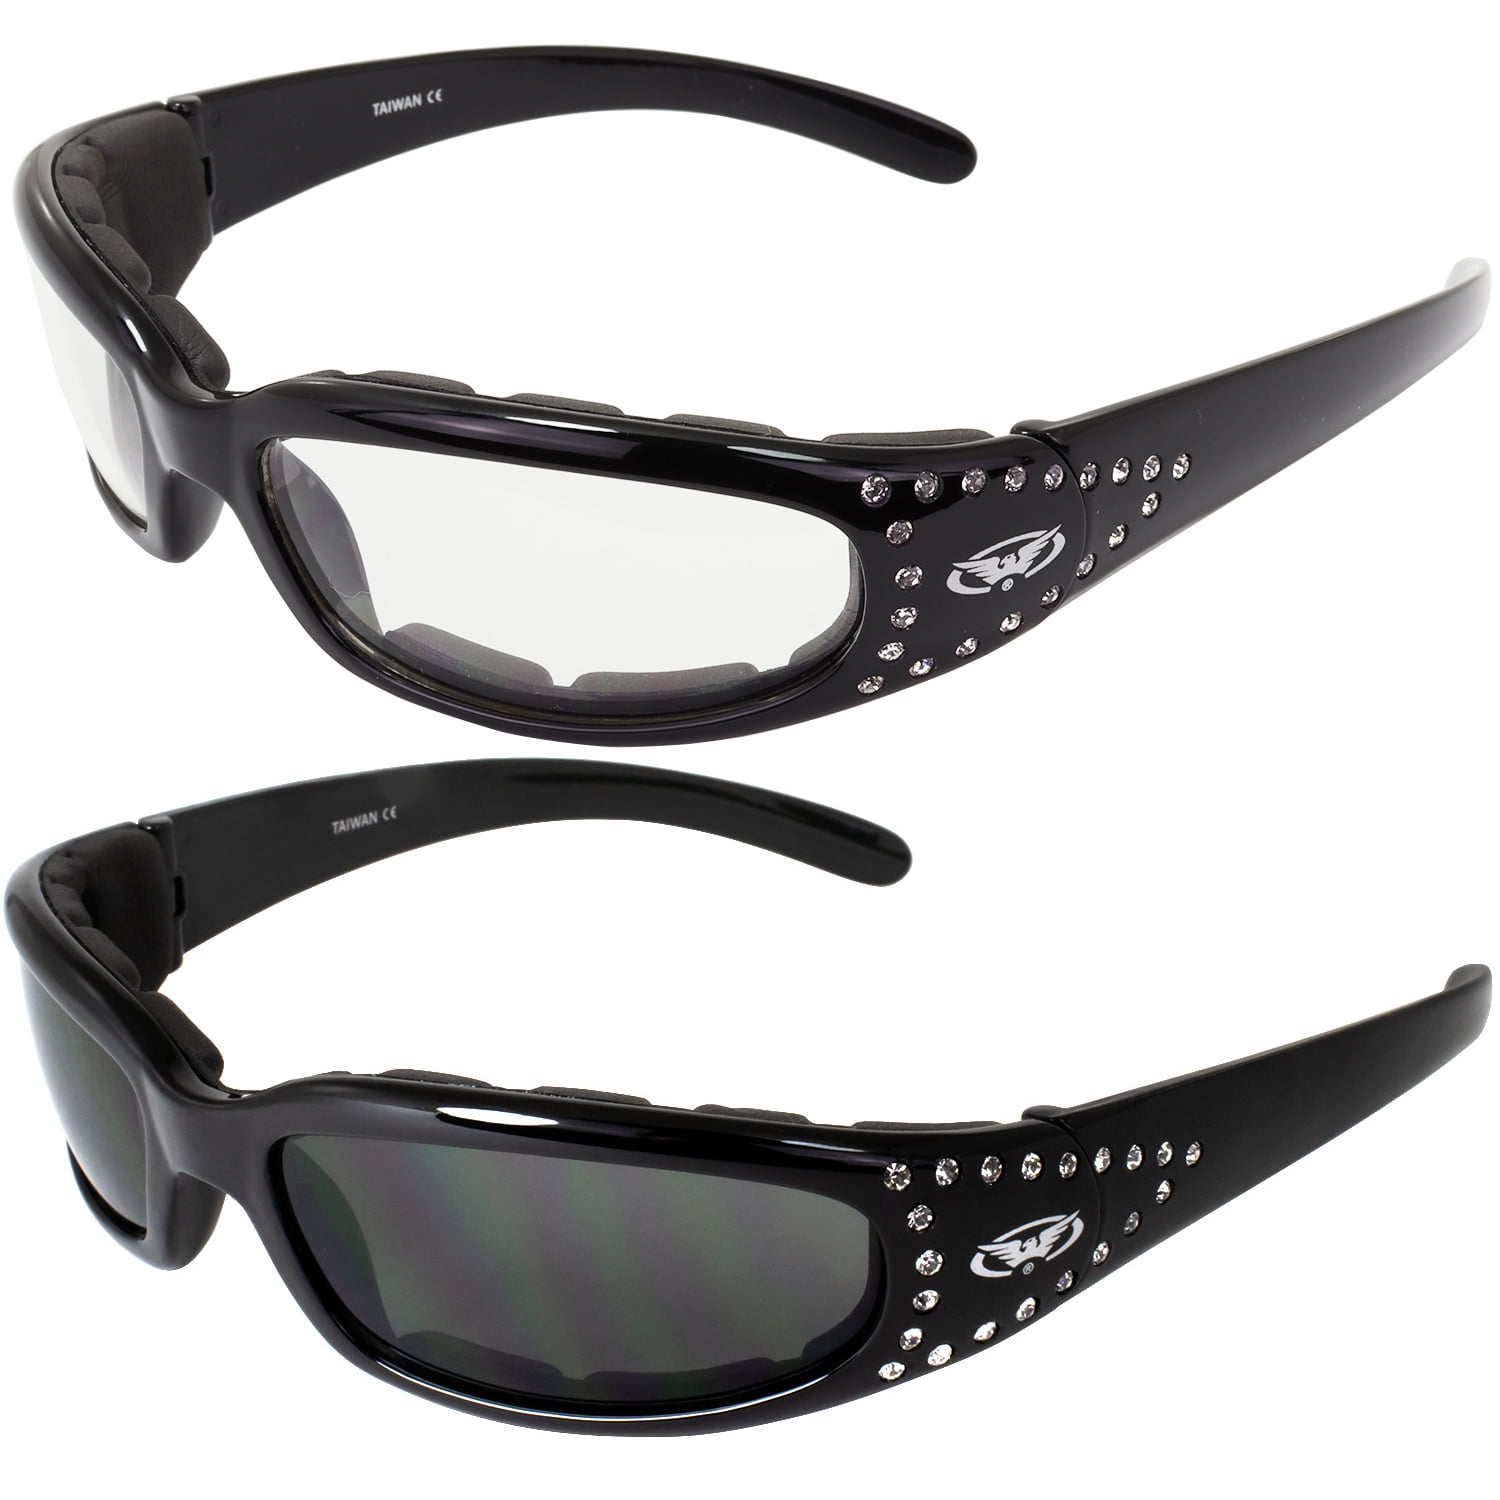 Set Of 2 Women Motorcycle Padded Sunglasses Glasses Clear And Smoked Rhinestones With Vented Eva